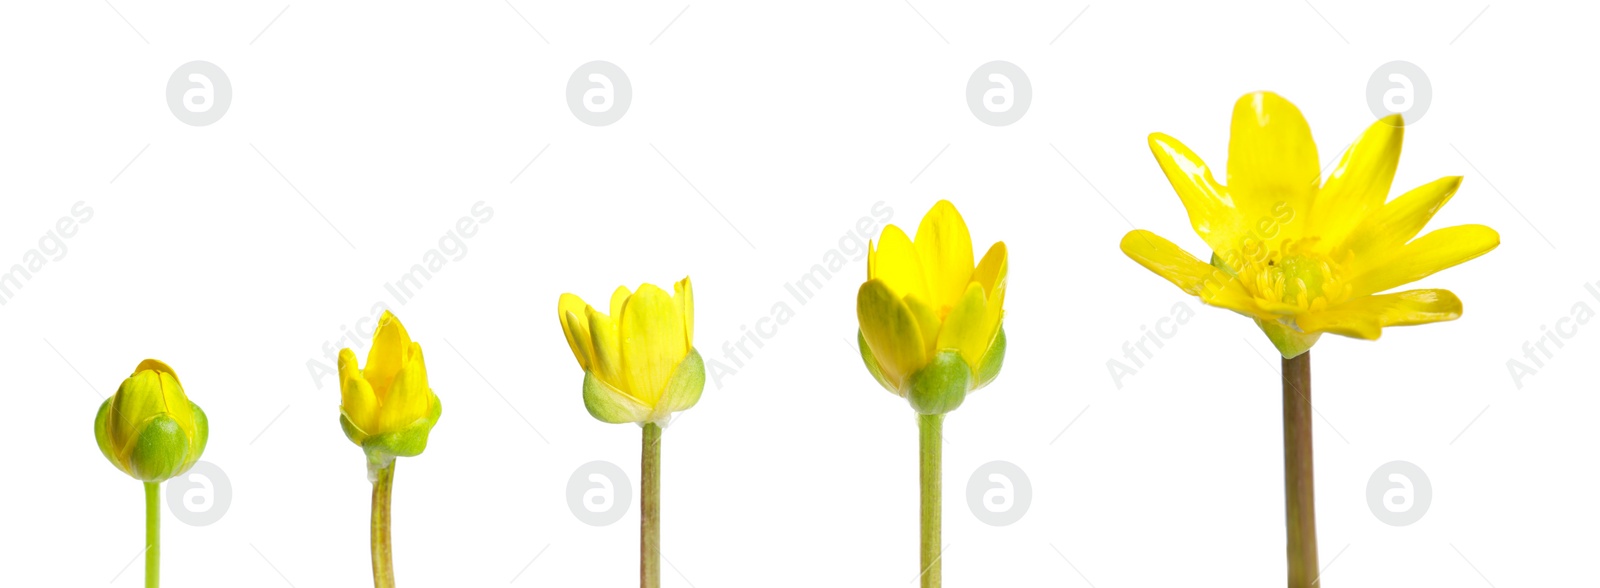 Image of Blooming stages of yellow lesser celandine flower on white background